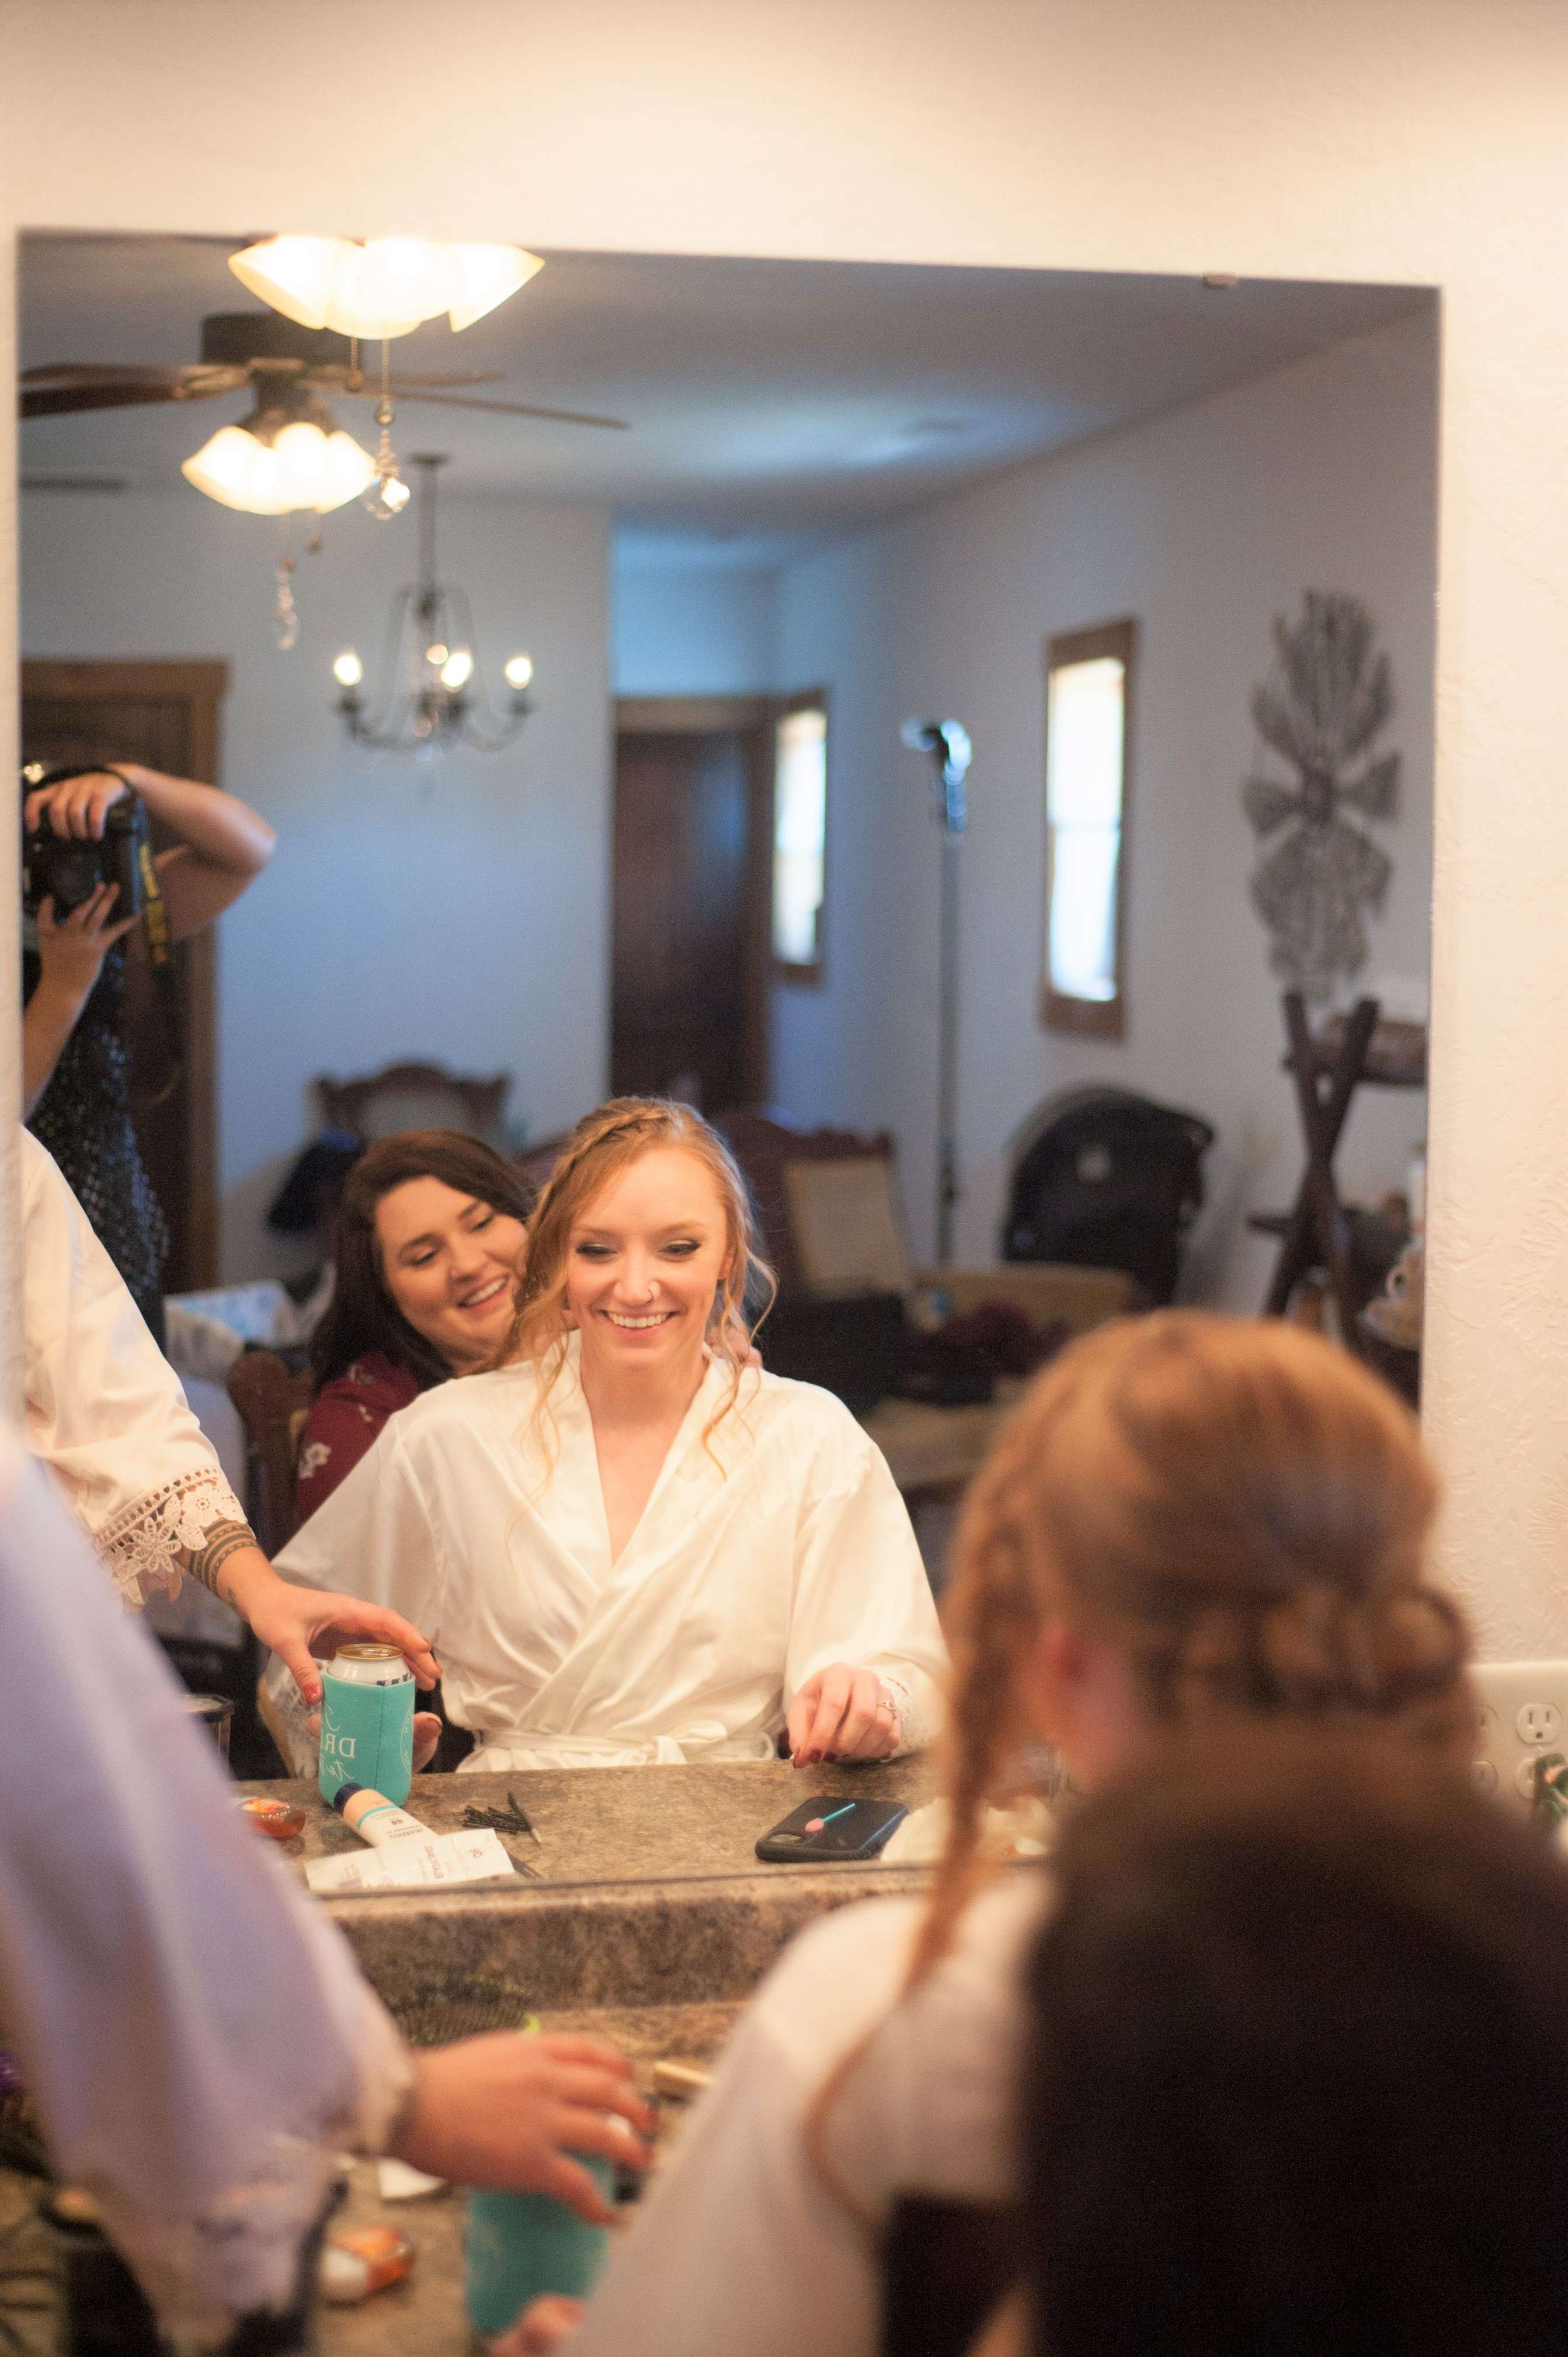 Bride getting ready for her wedding with her bridesmaids.